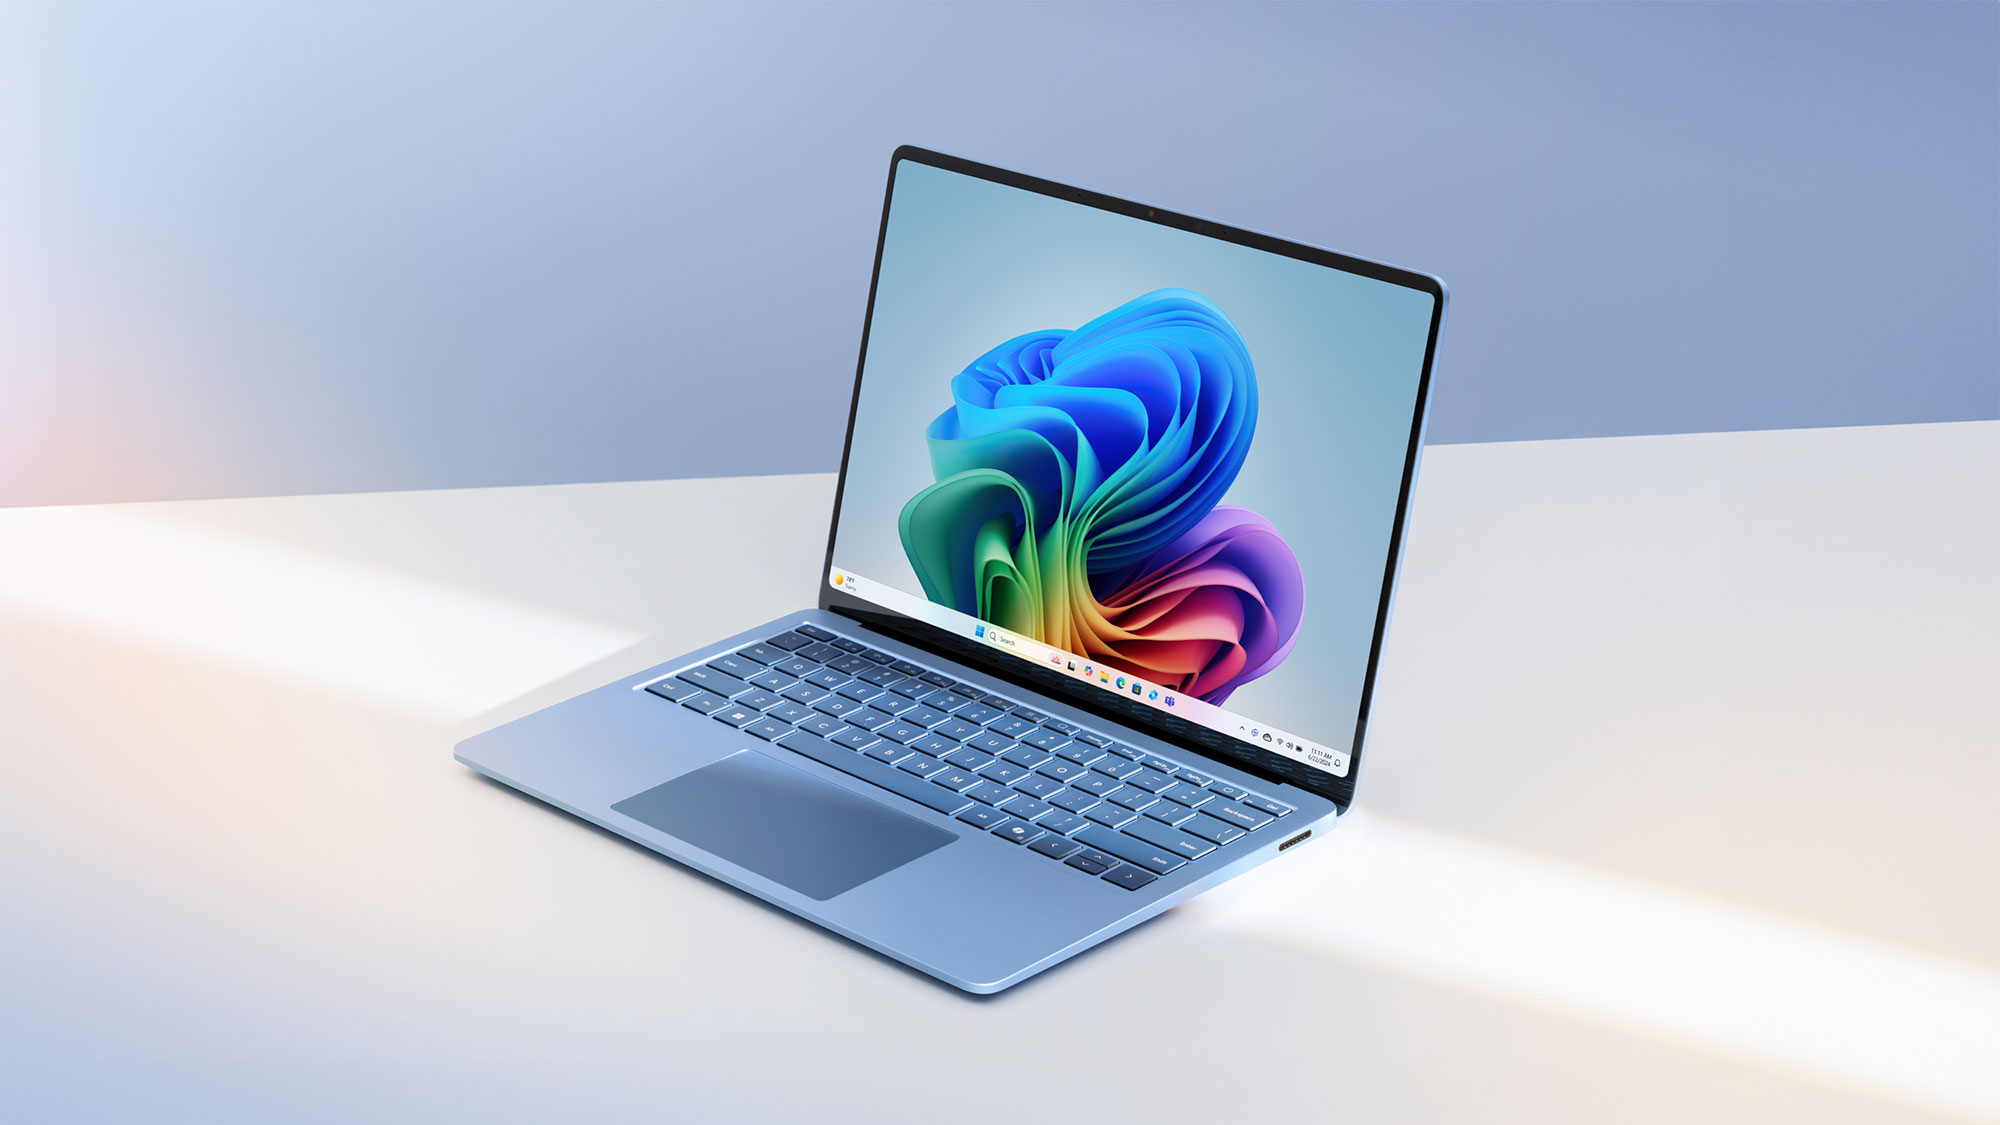 Angled front view of an open blue Surface Laptop facing the left with the Windows rainbow bloom image on the home screen.